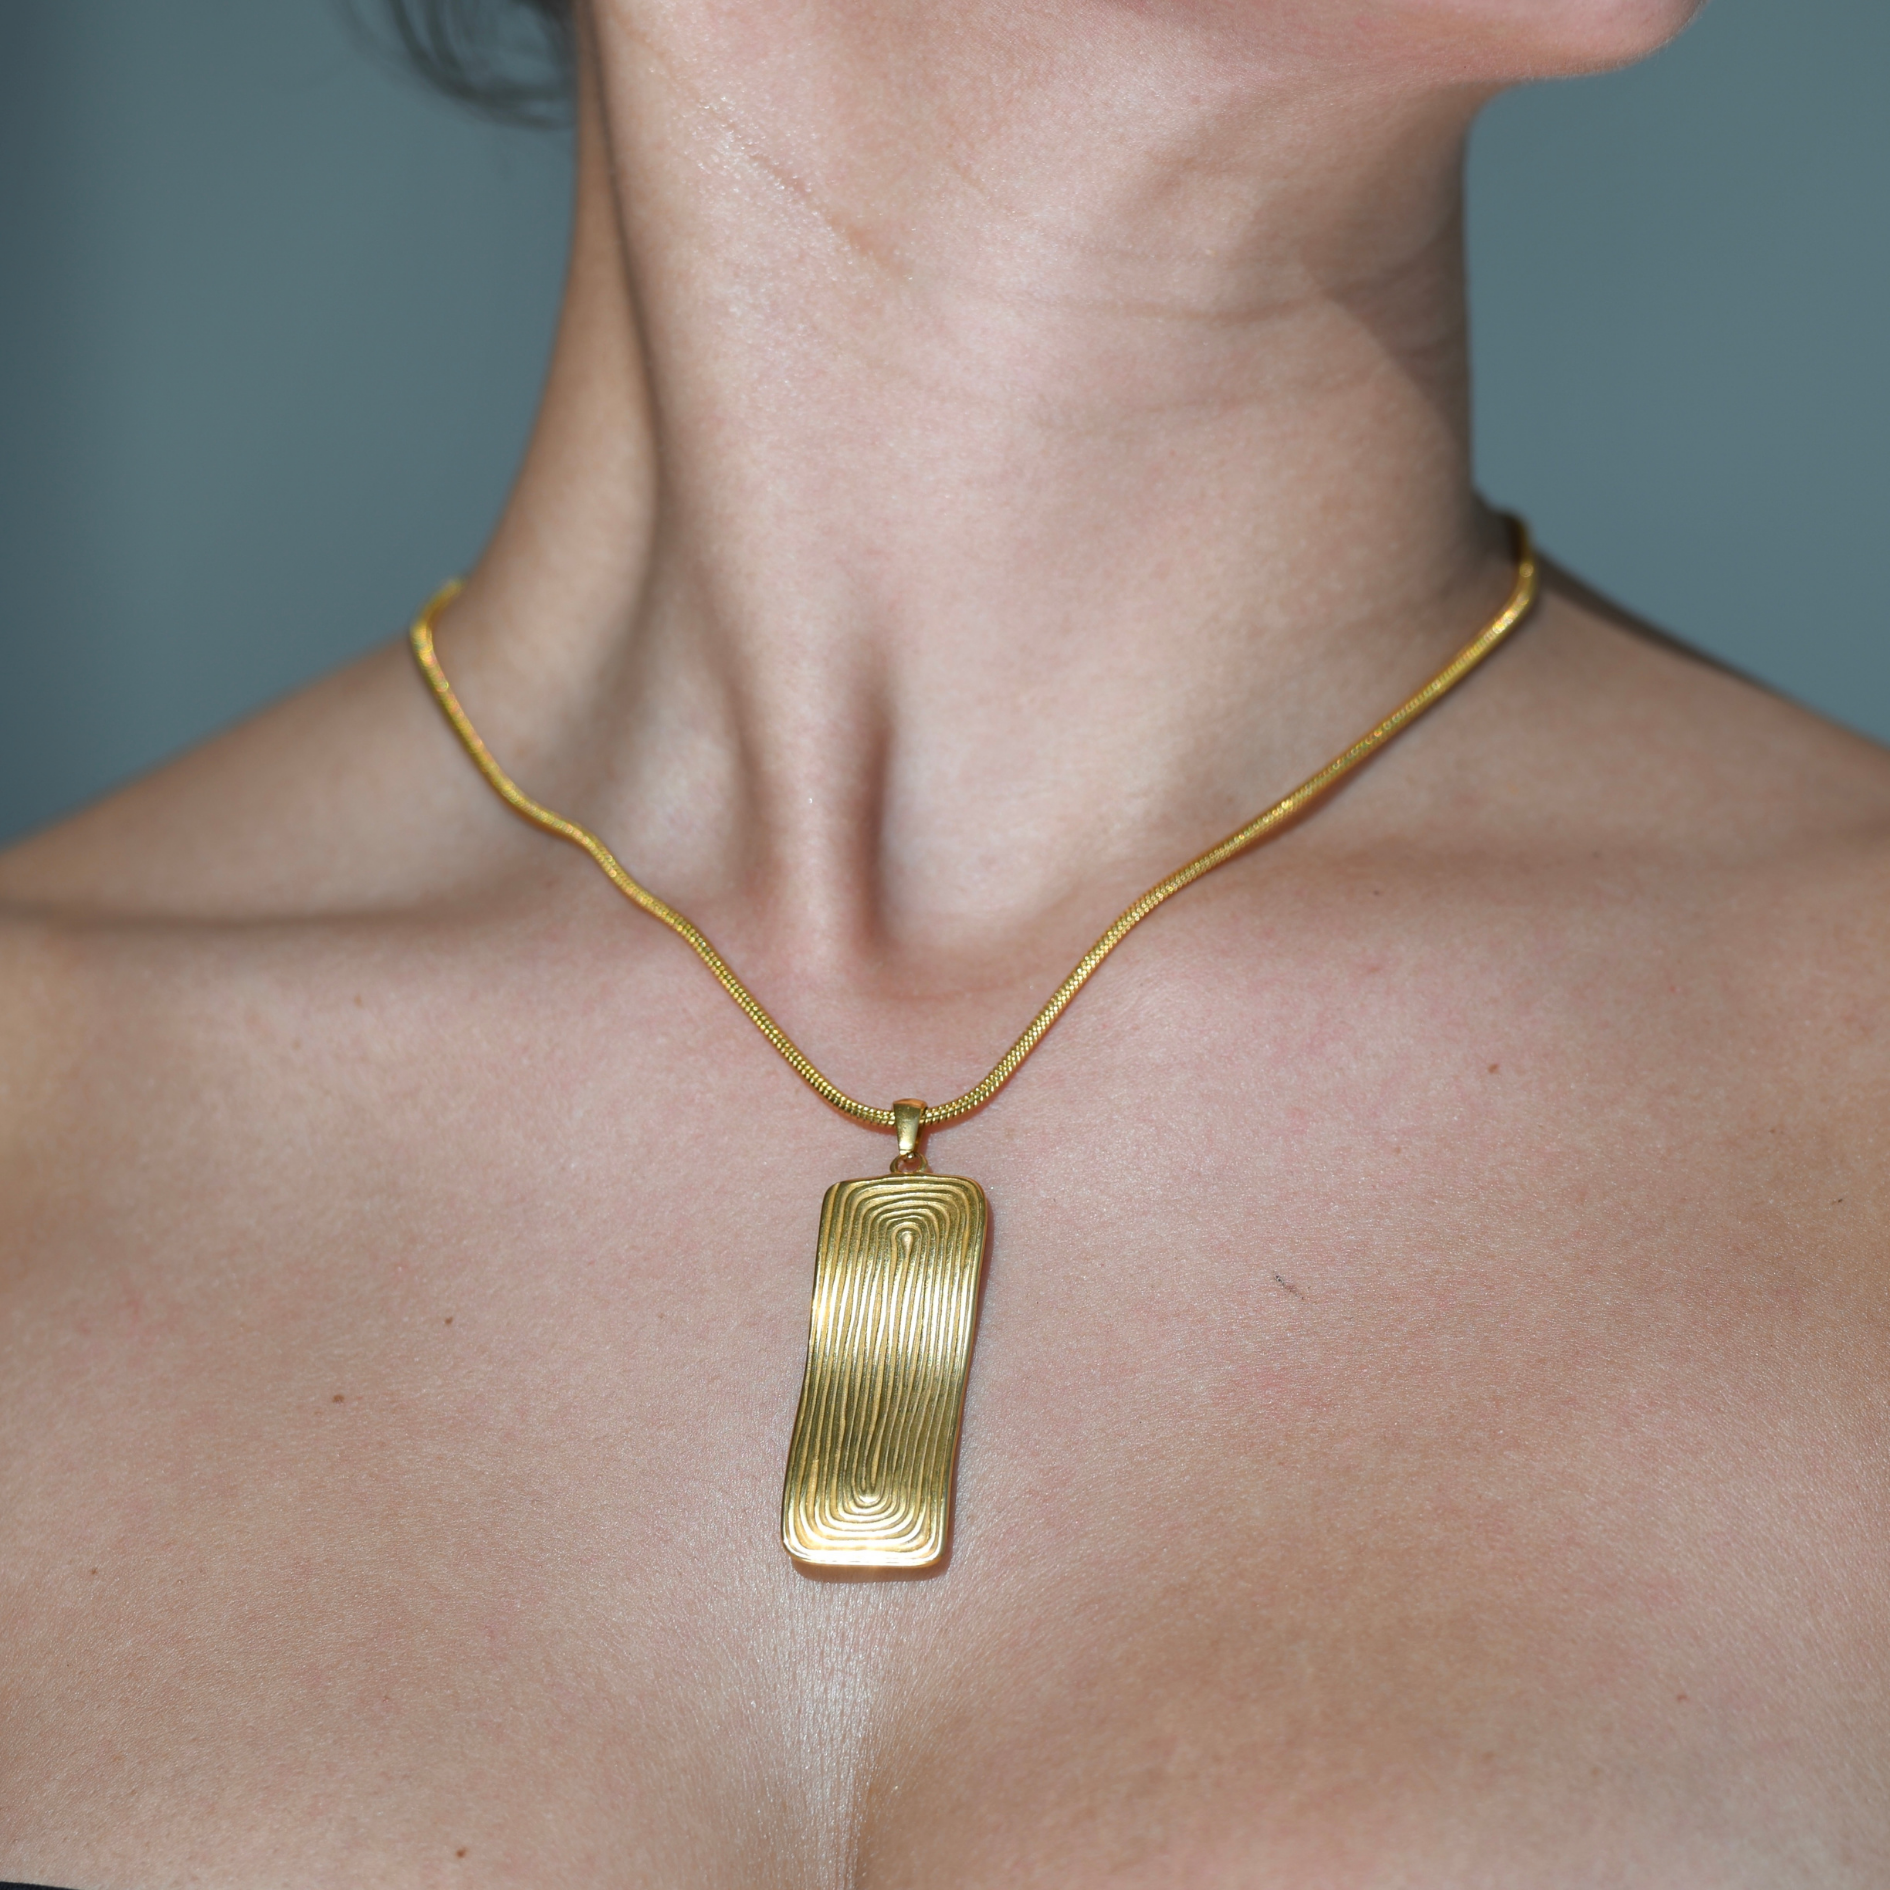 Gold plated chain necklace. An irregular shape bold rectangular pendant drops on the chain. Circular oval shape are engraved on the pendant. Maya pendant gold waterproof necklace.